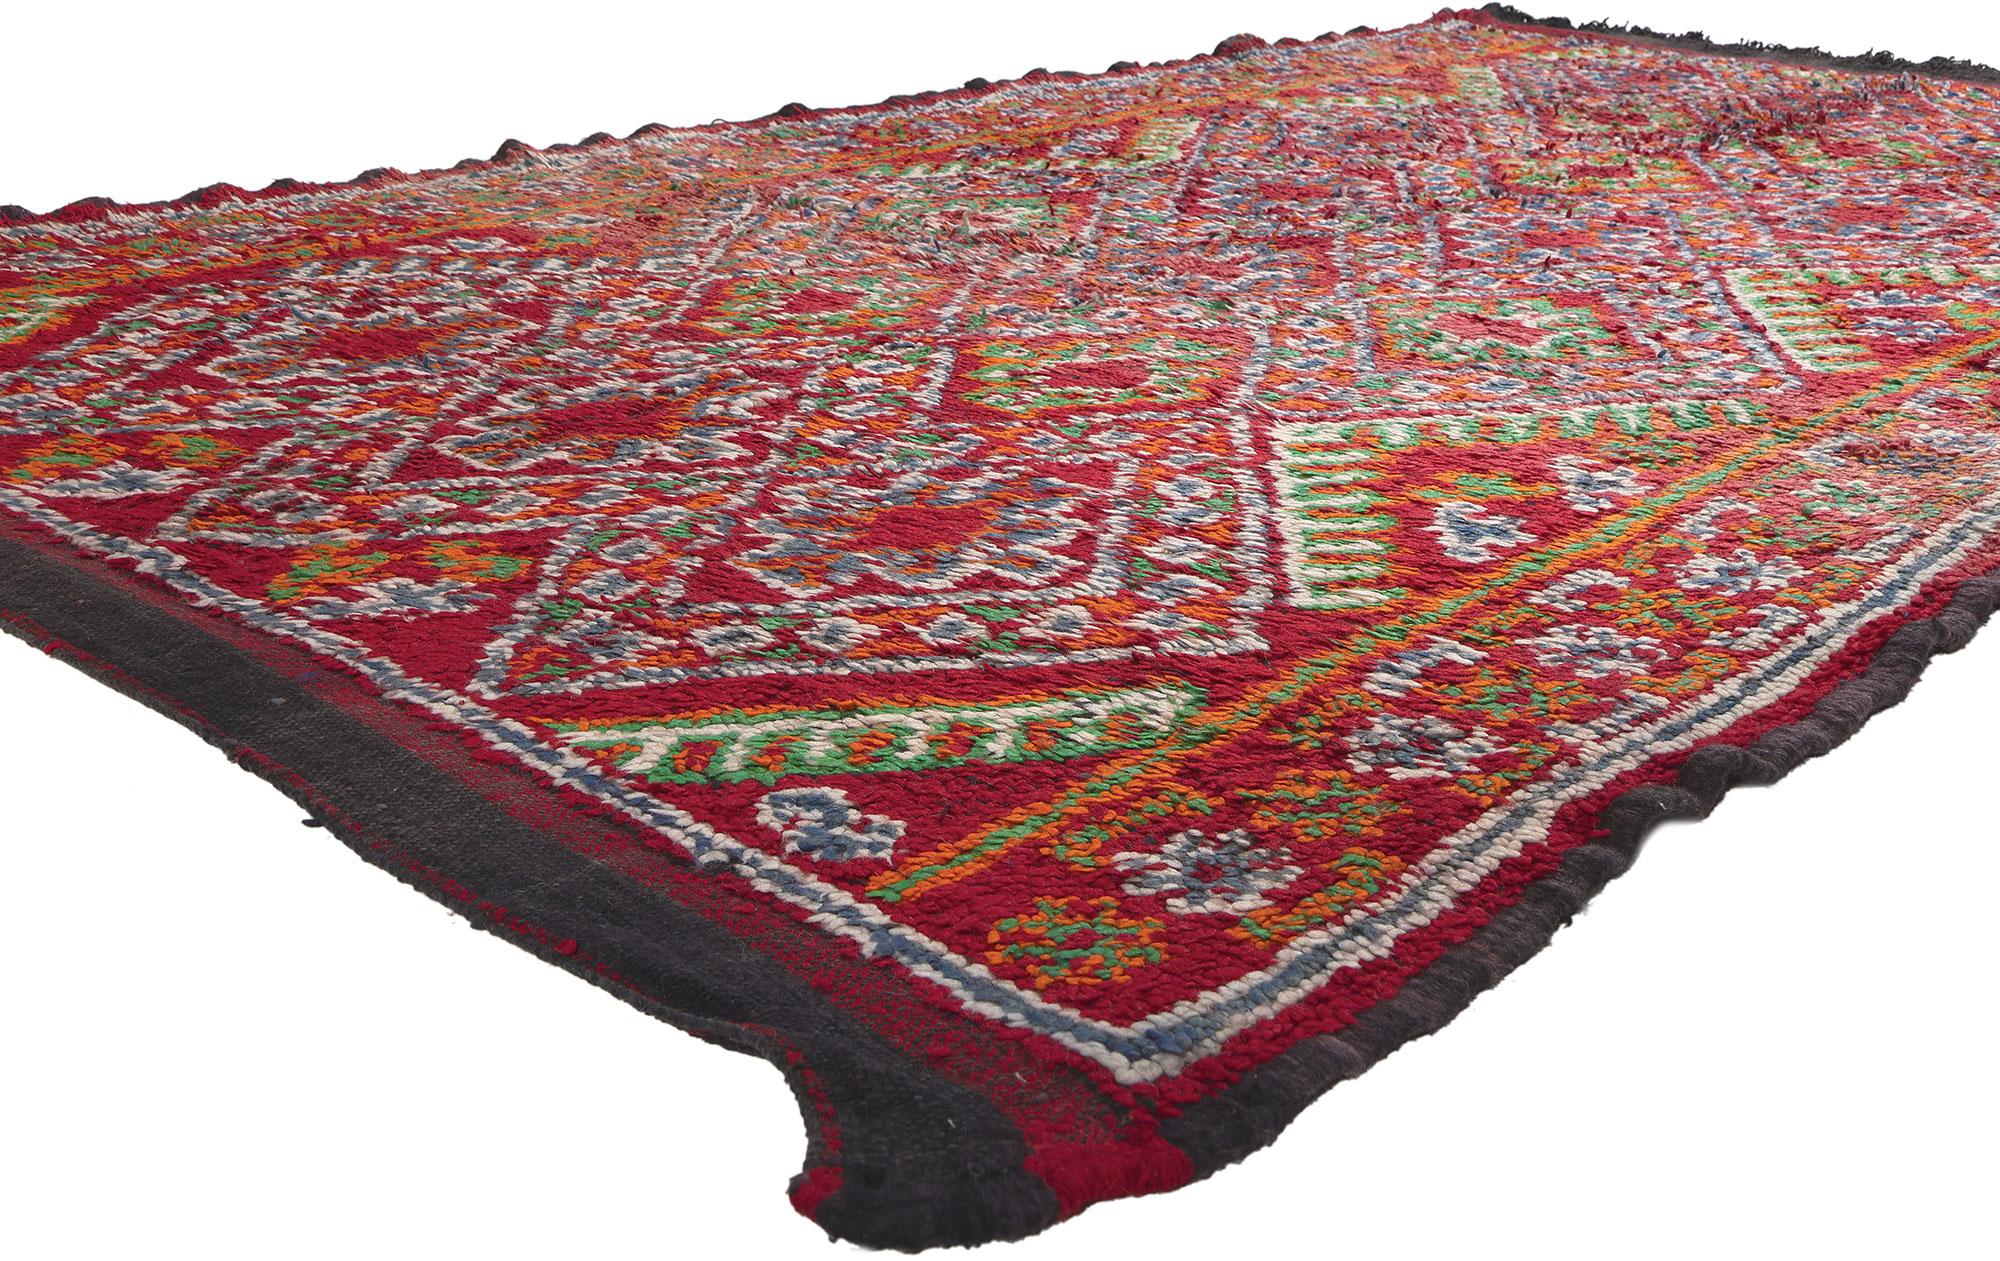 20940 Vintage Red Beni MGuild Moroccan Rug, 06'04 x 10'10. Embark on a vibrant visual odyssey through the rich history of Moroccan culture with our hand-knotted Beni MGuild vintage rug—a dazzling masterpiece that seamlessly melds hues, patterns, and